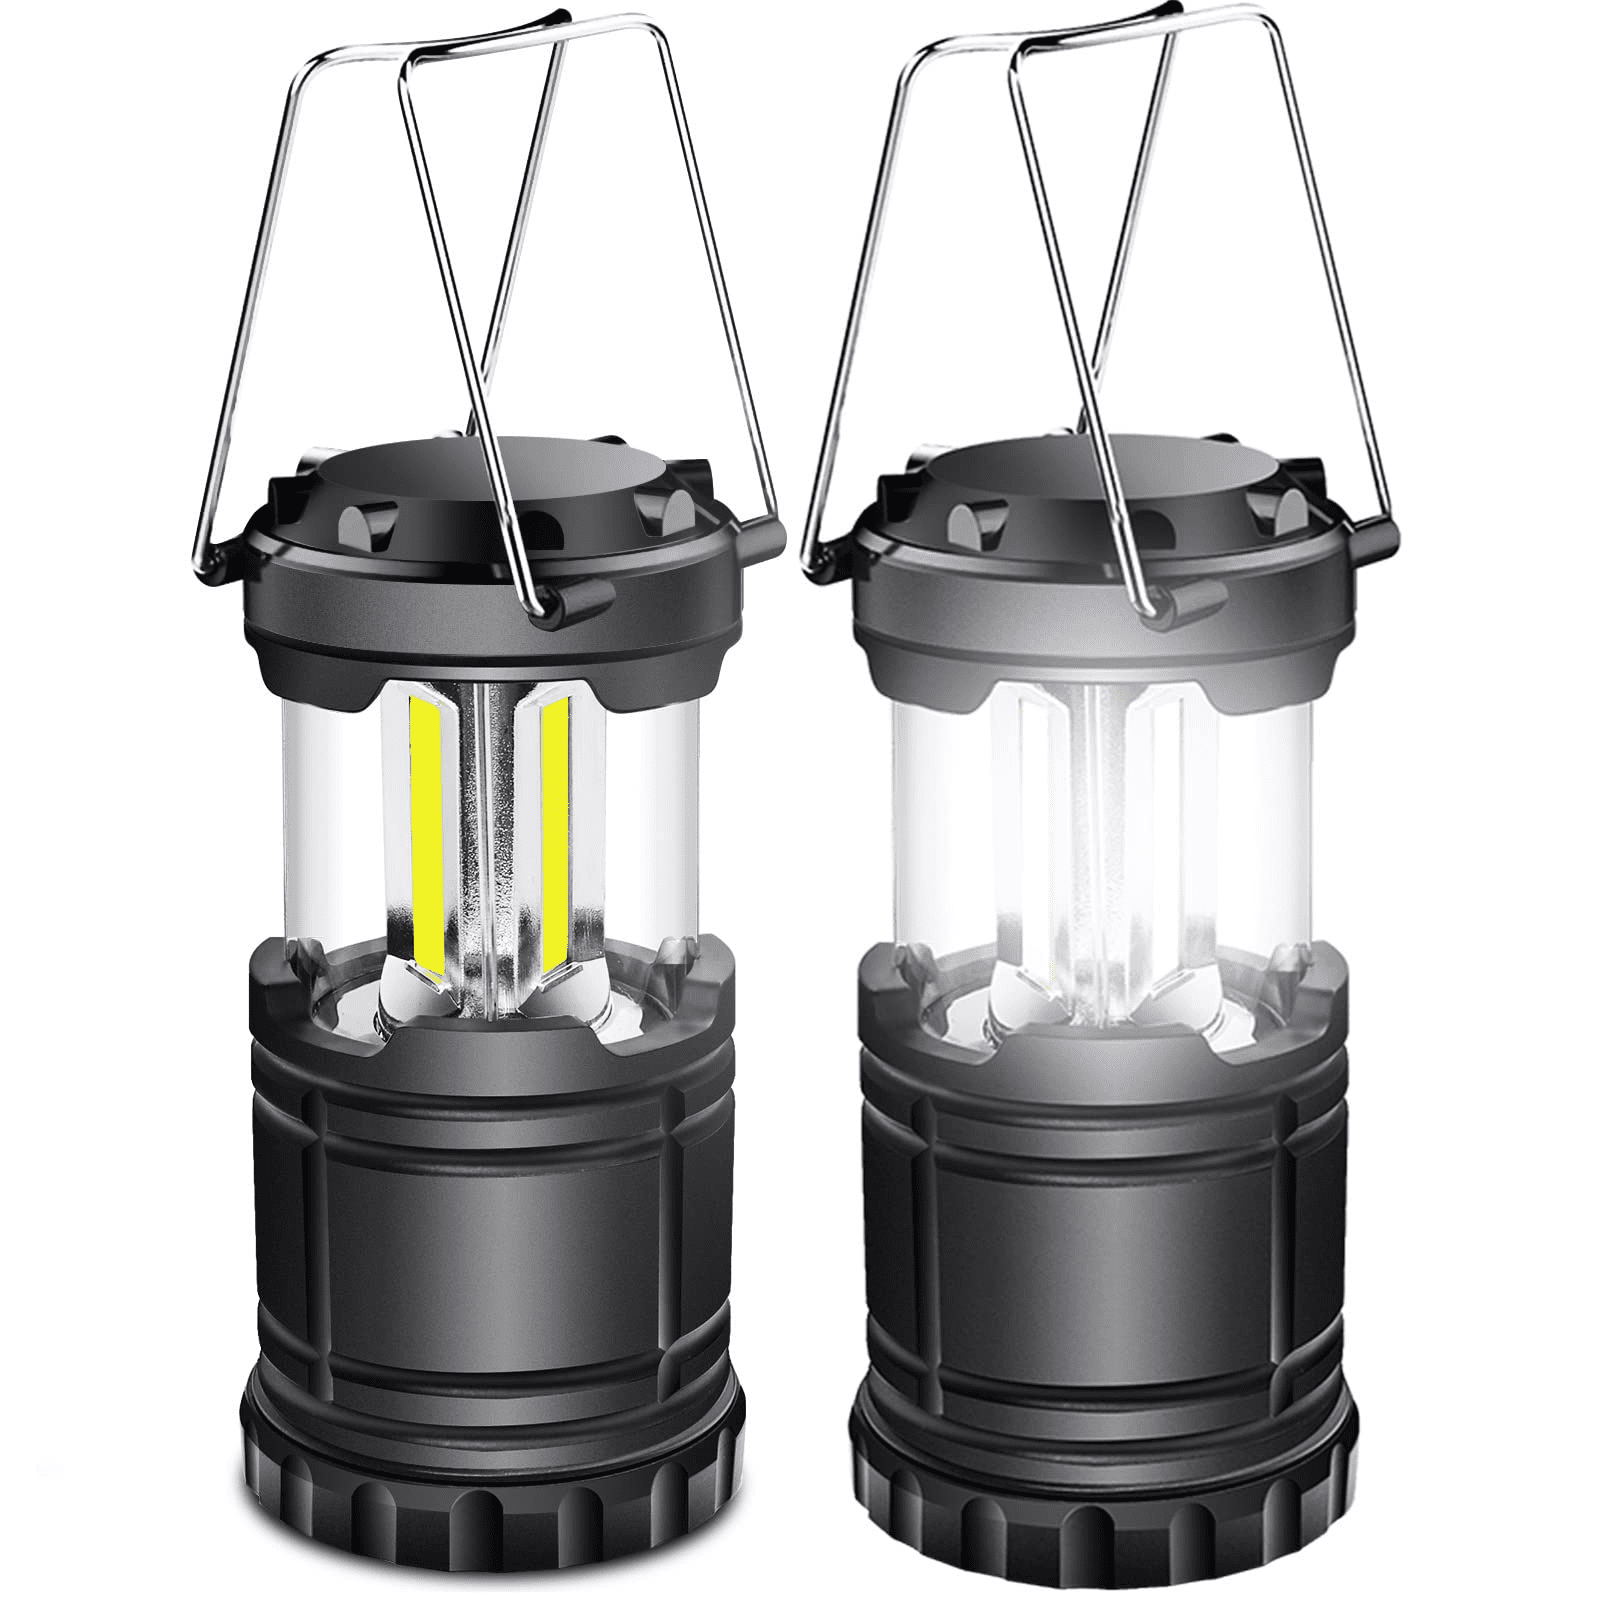 Vont LED Camping Lanterns Black Collapsible Batteries Included (2 Pack)  784672375658